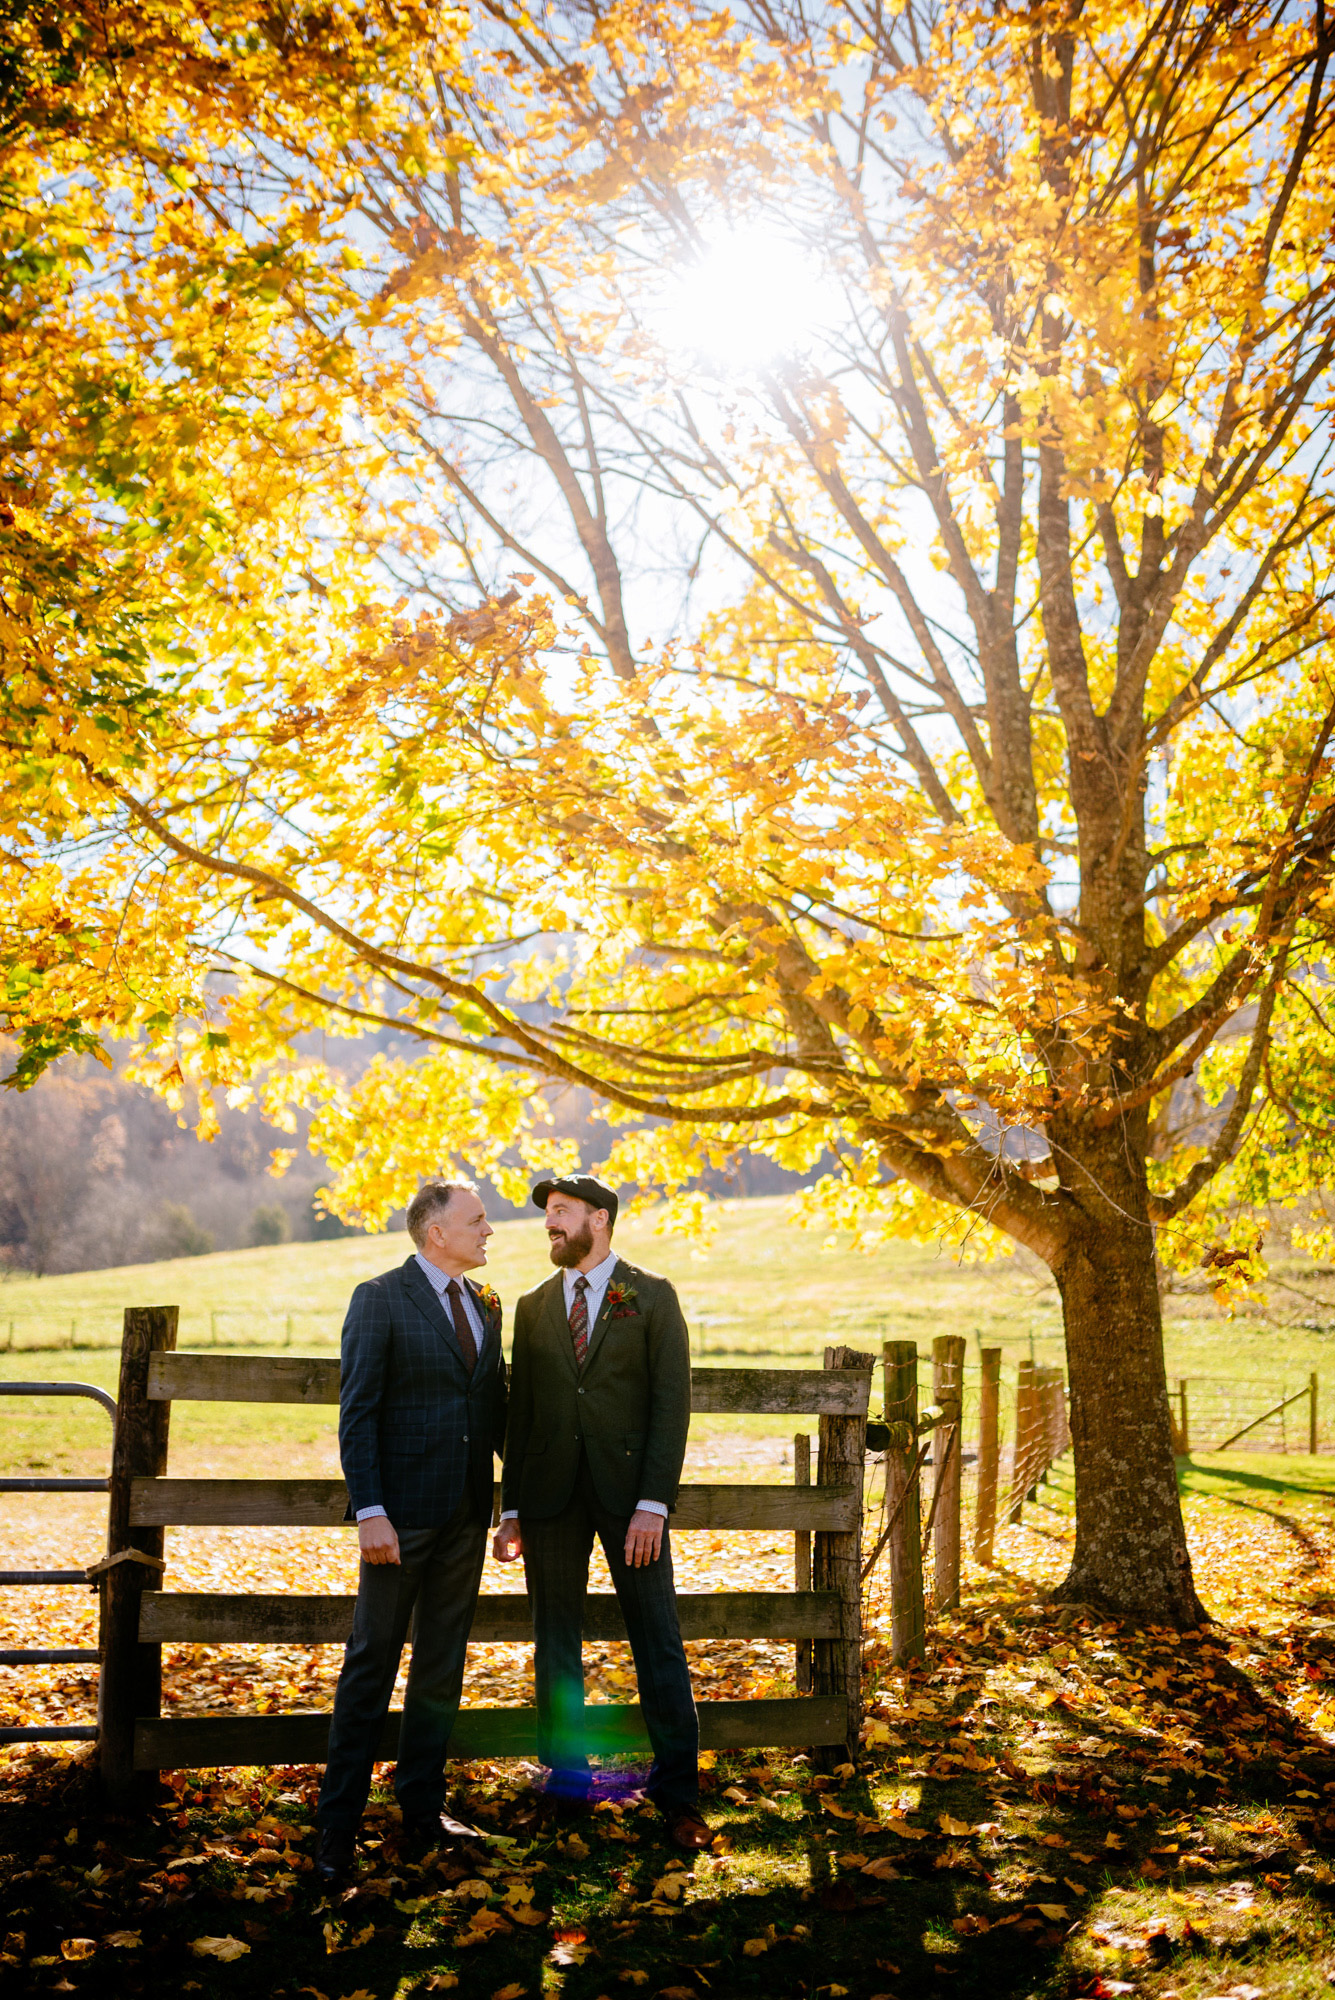 A couple in coordinated autumnal attire stands by a wooden fence under a golden yellow tree.